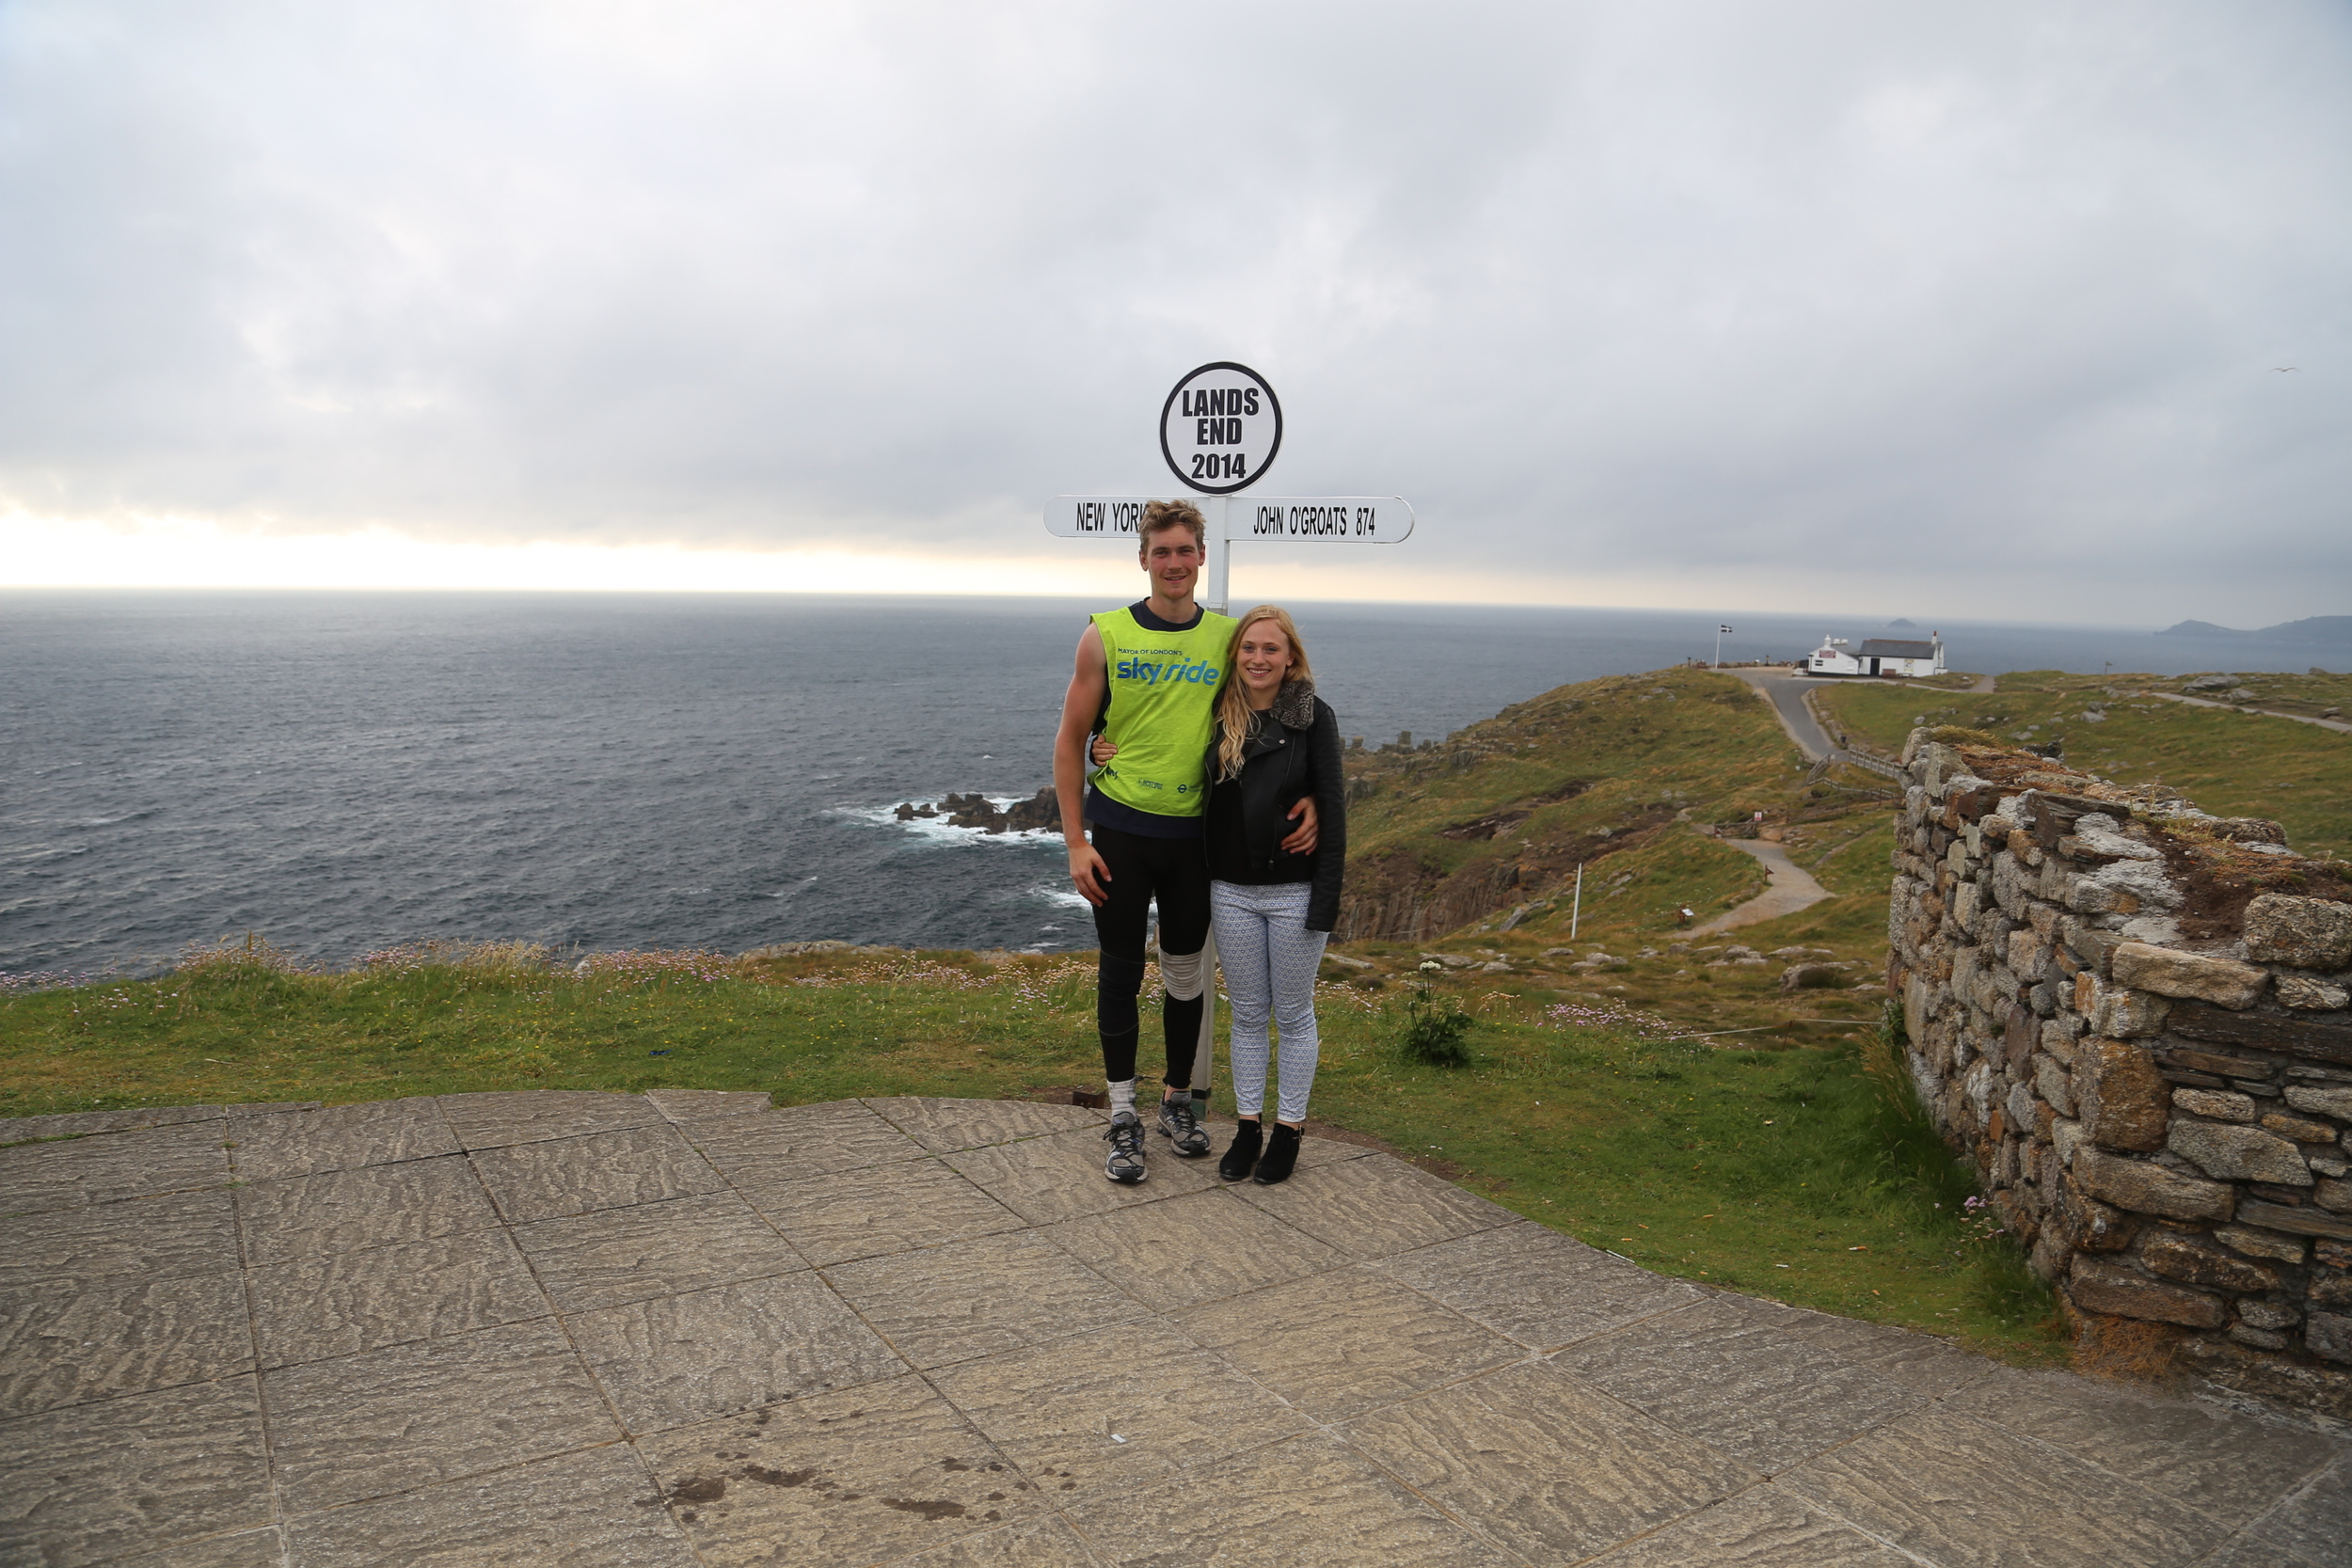 lands end, girlfriend, touring bikes, bike gear, adventure cycling, ride, bikepacking, cycle routes, touring bicycles